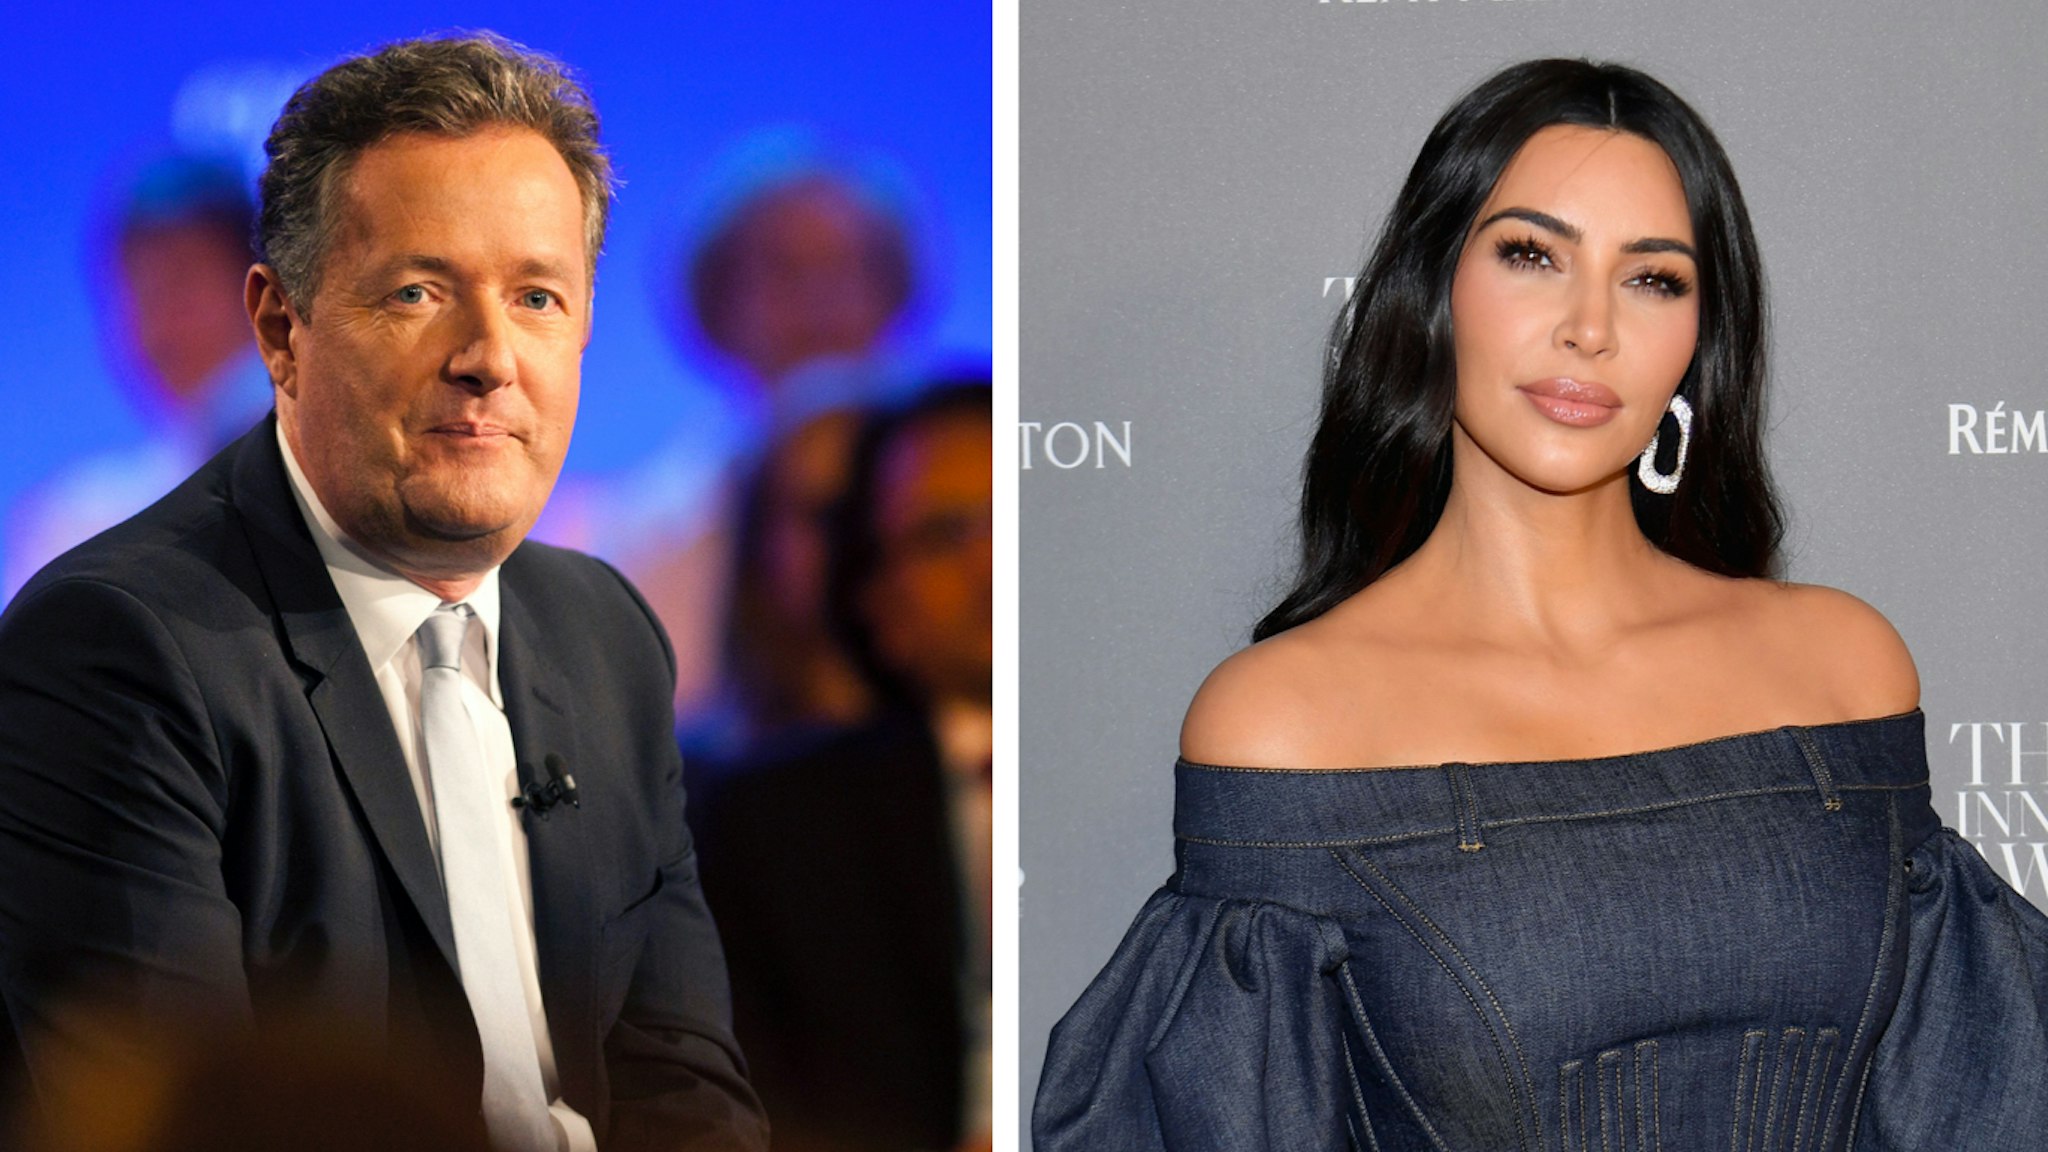 Piers Morgan, speaks during a taping of CNN's Piers Morgan Tonight at the annual Clinton Global Initiative (CGI) meeting on September 25, 2013 in New York City. US media personality Kim Kardashian West attends the WSJ Magazine 2019 Innovator Awards at MOMA on November 6, 2019 in New York City.